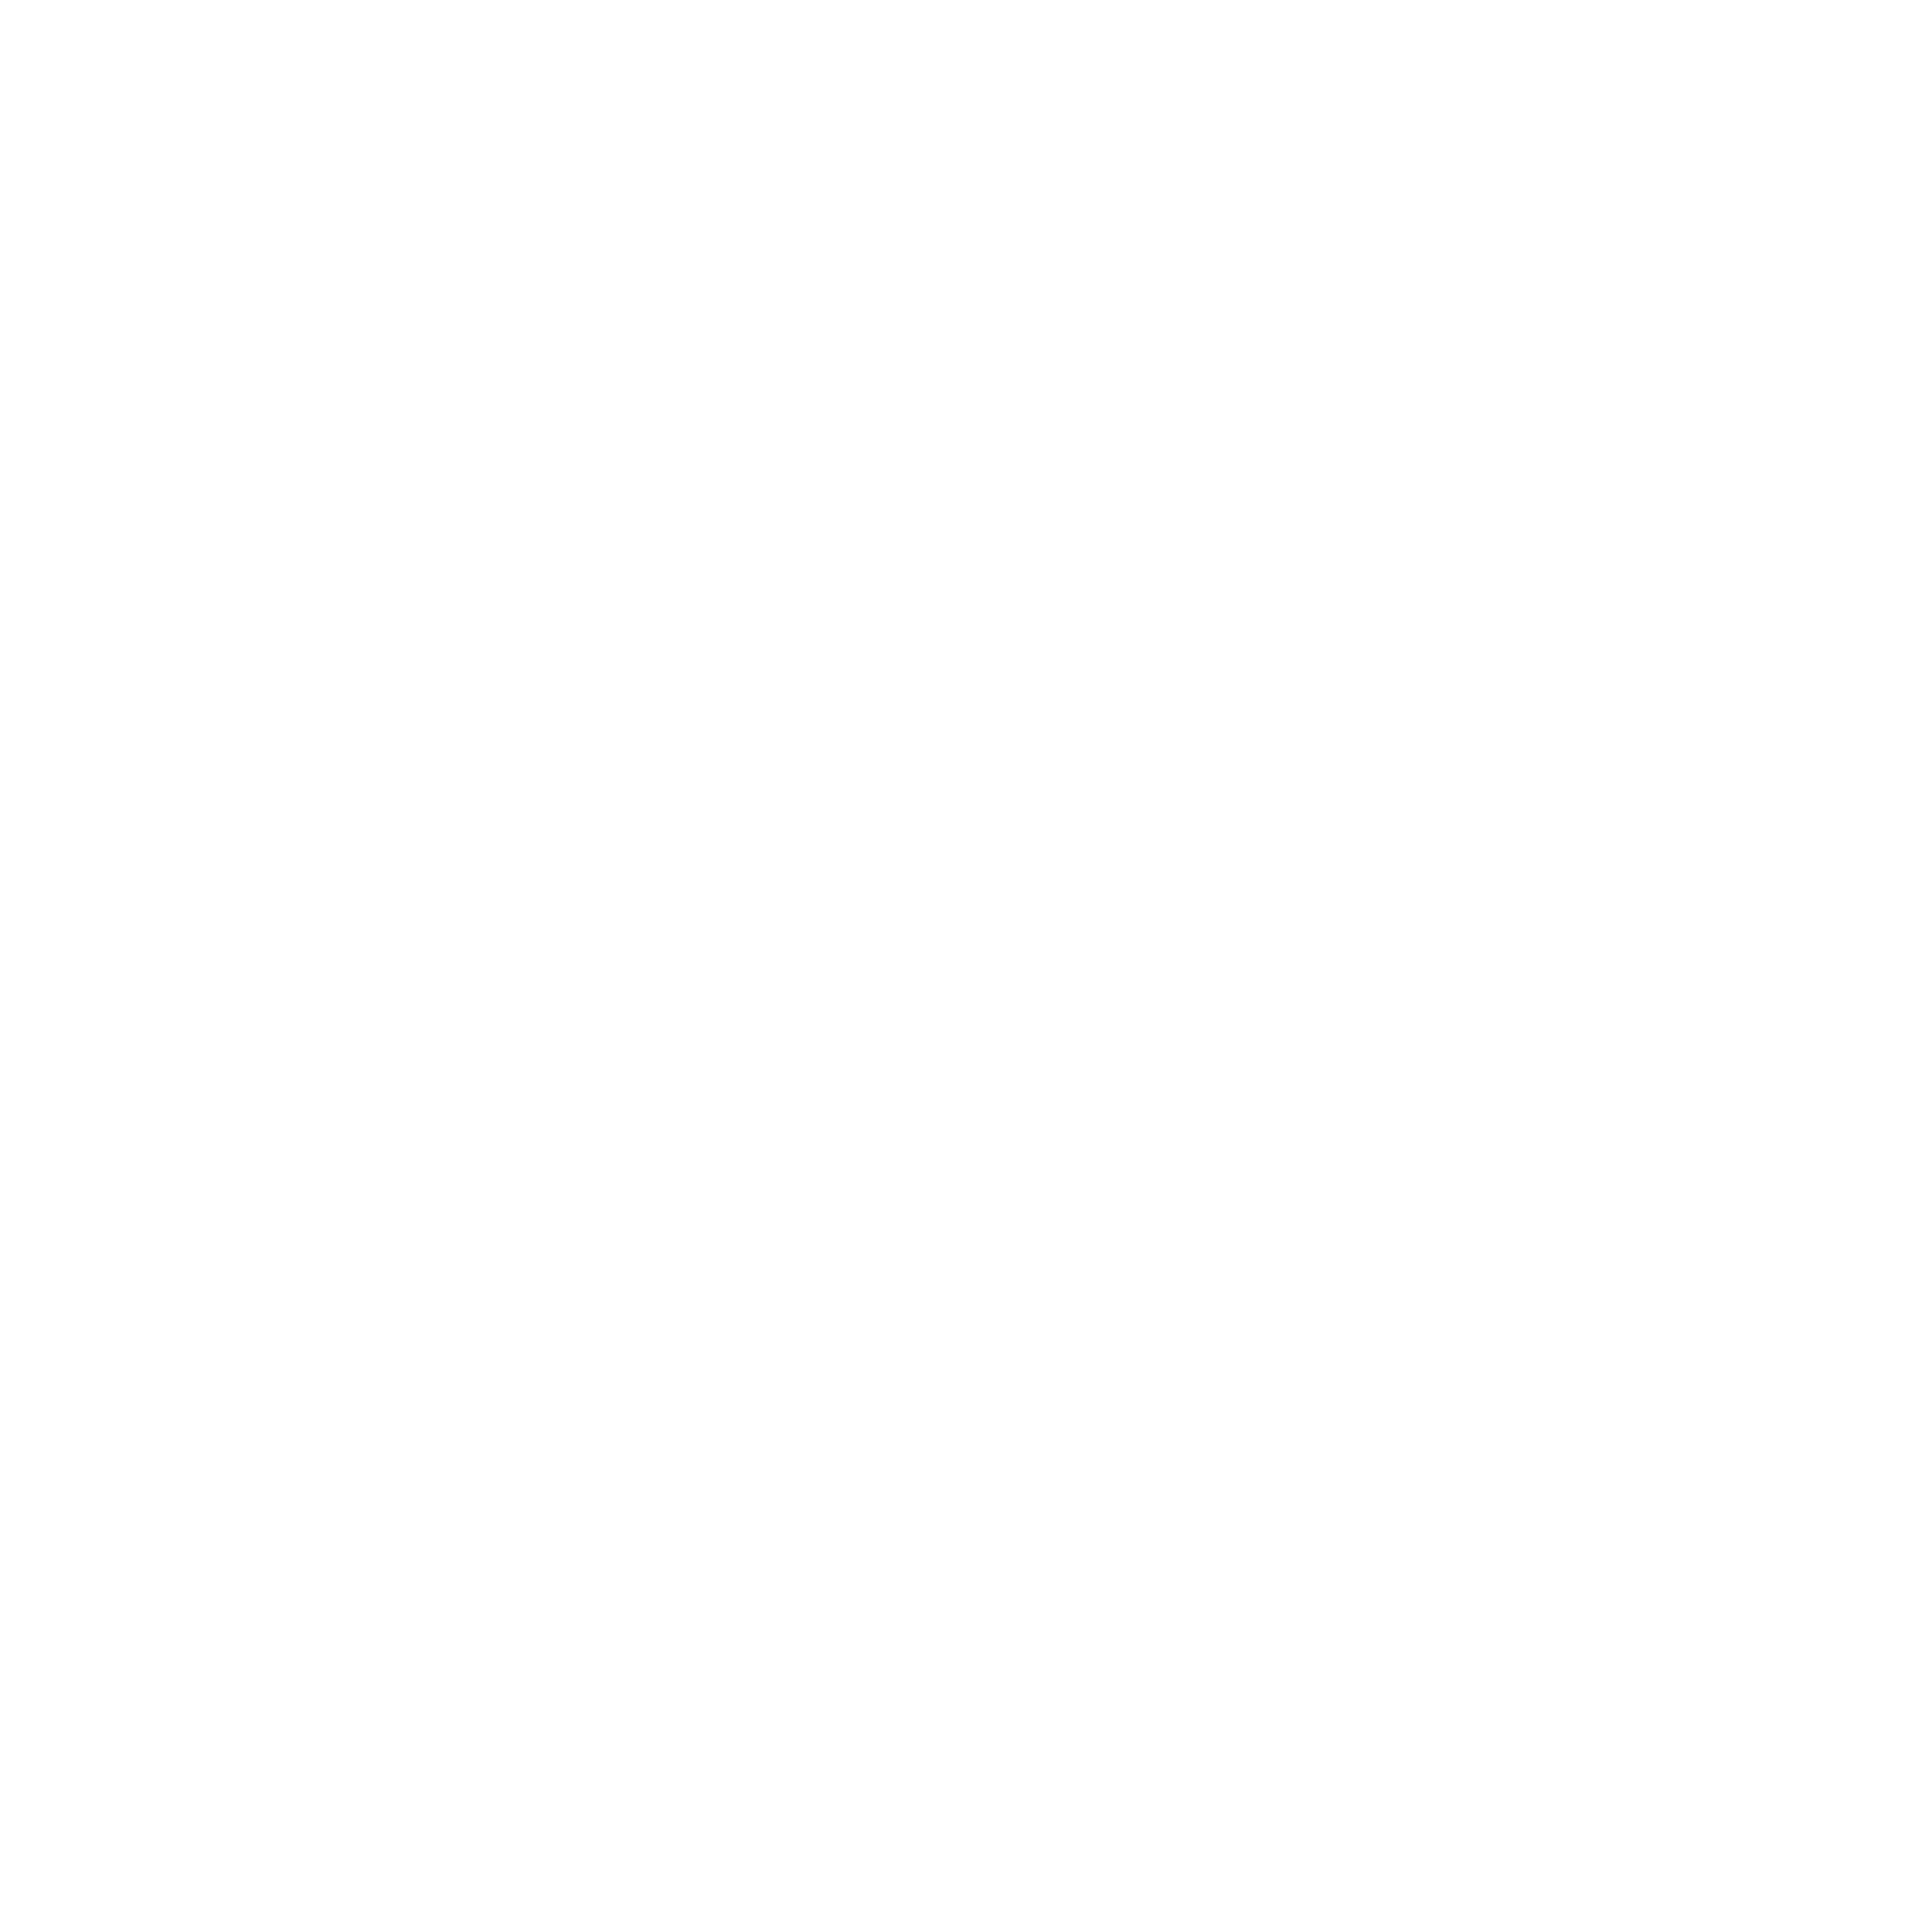 This is the Scott Mission Camp Logo.